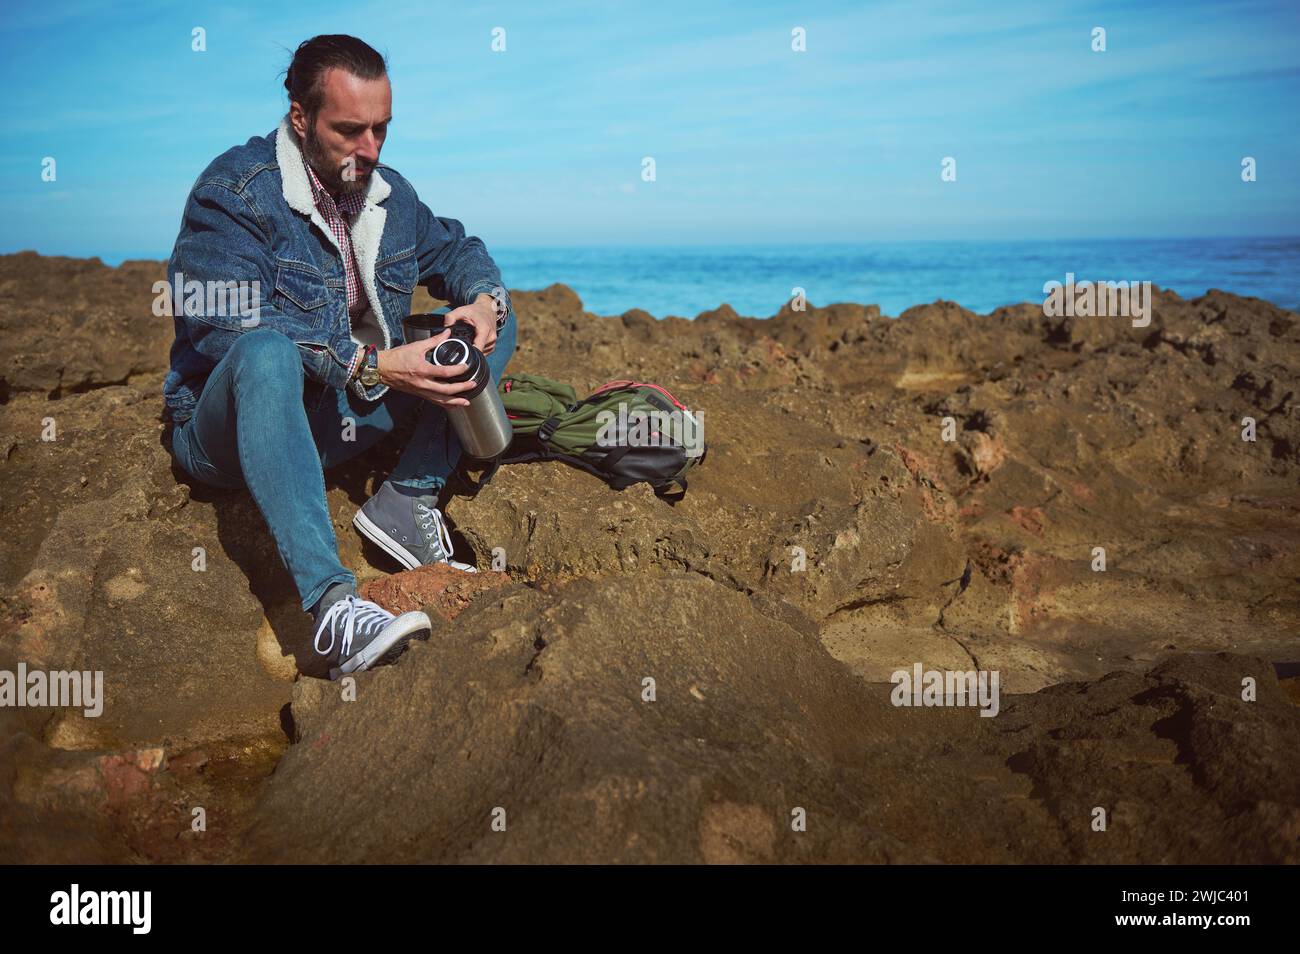 Caucasian bearded serious man, hiker, traveler, adventurer sitting on the rocky cliff by seam holding a stainless steel thermos with hot drink. People Stock Photo